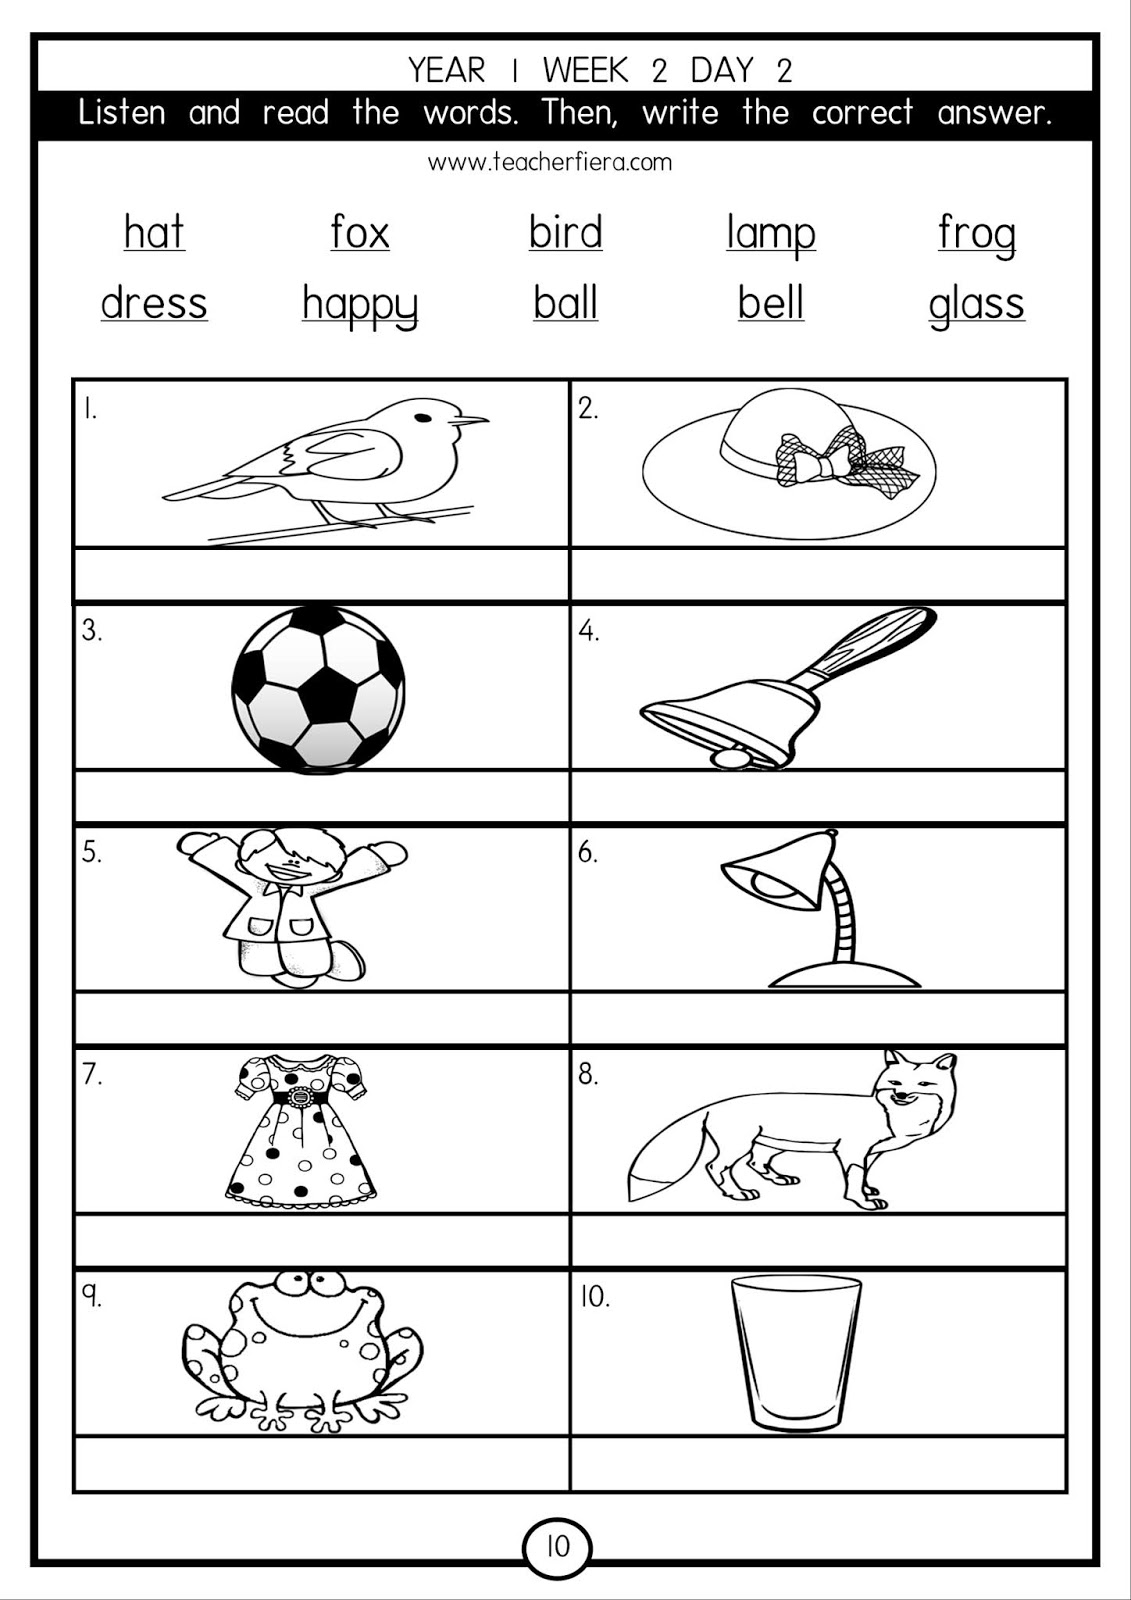 Teacherfiera YEAR 1 2019 4 WEEKS PHONICS BASED LESSONS BOOKLET WITH WORD LIST REVISED